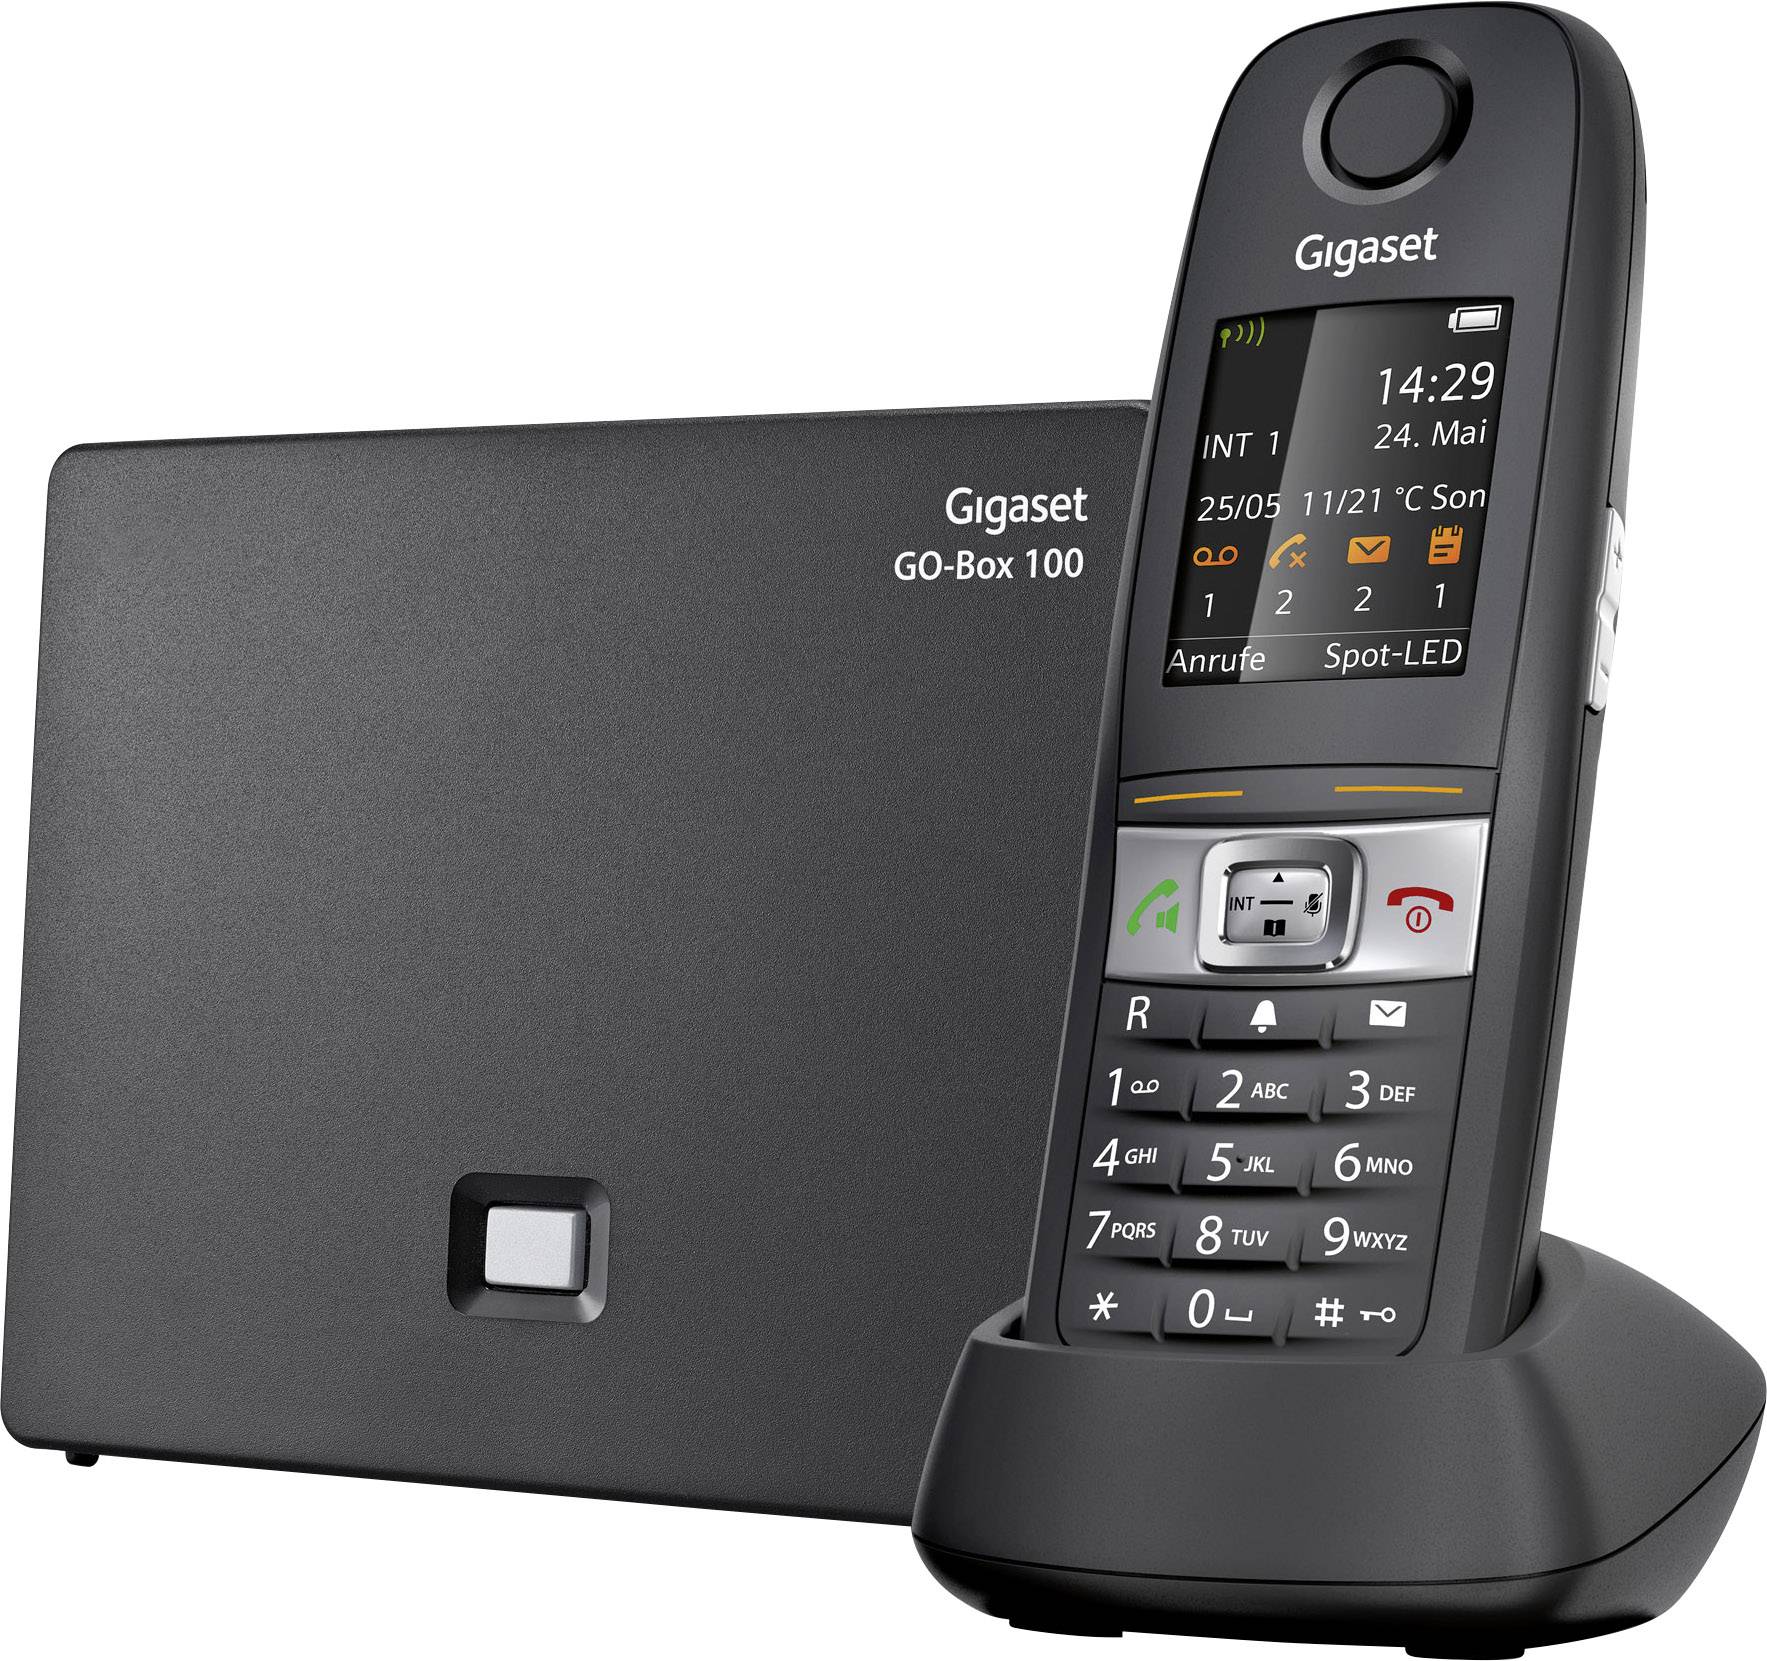 shockproof, Colour Black waterproof, E630A GO Buy Cordless Gigaset VoIP TFT/LCD | Conrad Hands-free Electronic